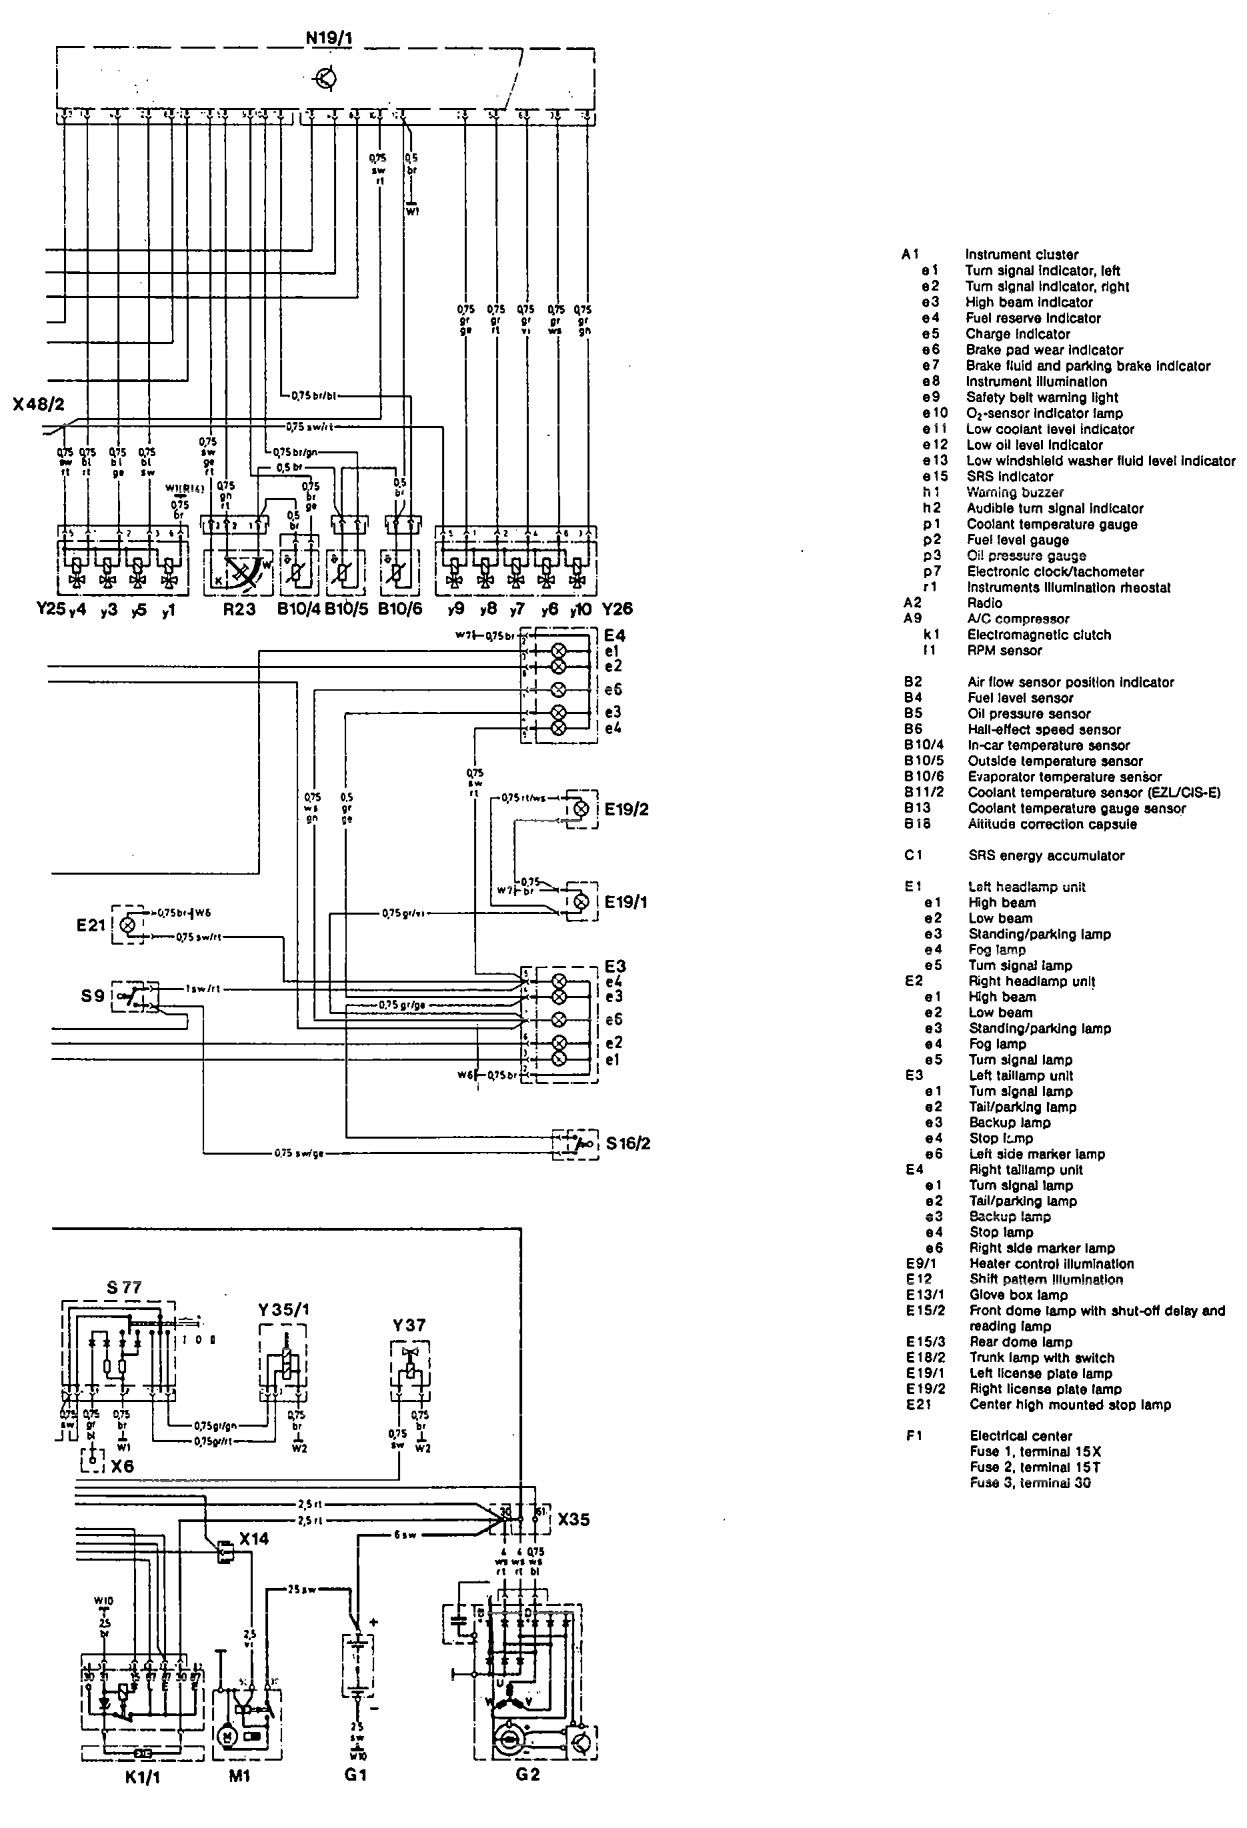 Wiring Diagram For 1990 Fender Hm Strat from www.carknowledge.info